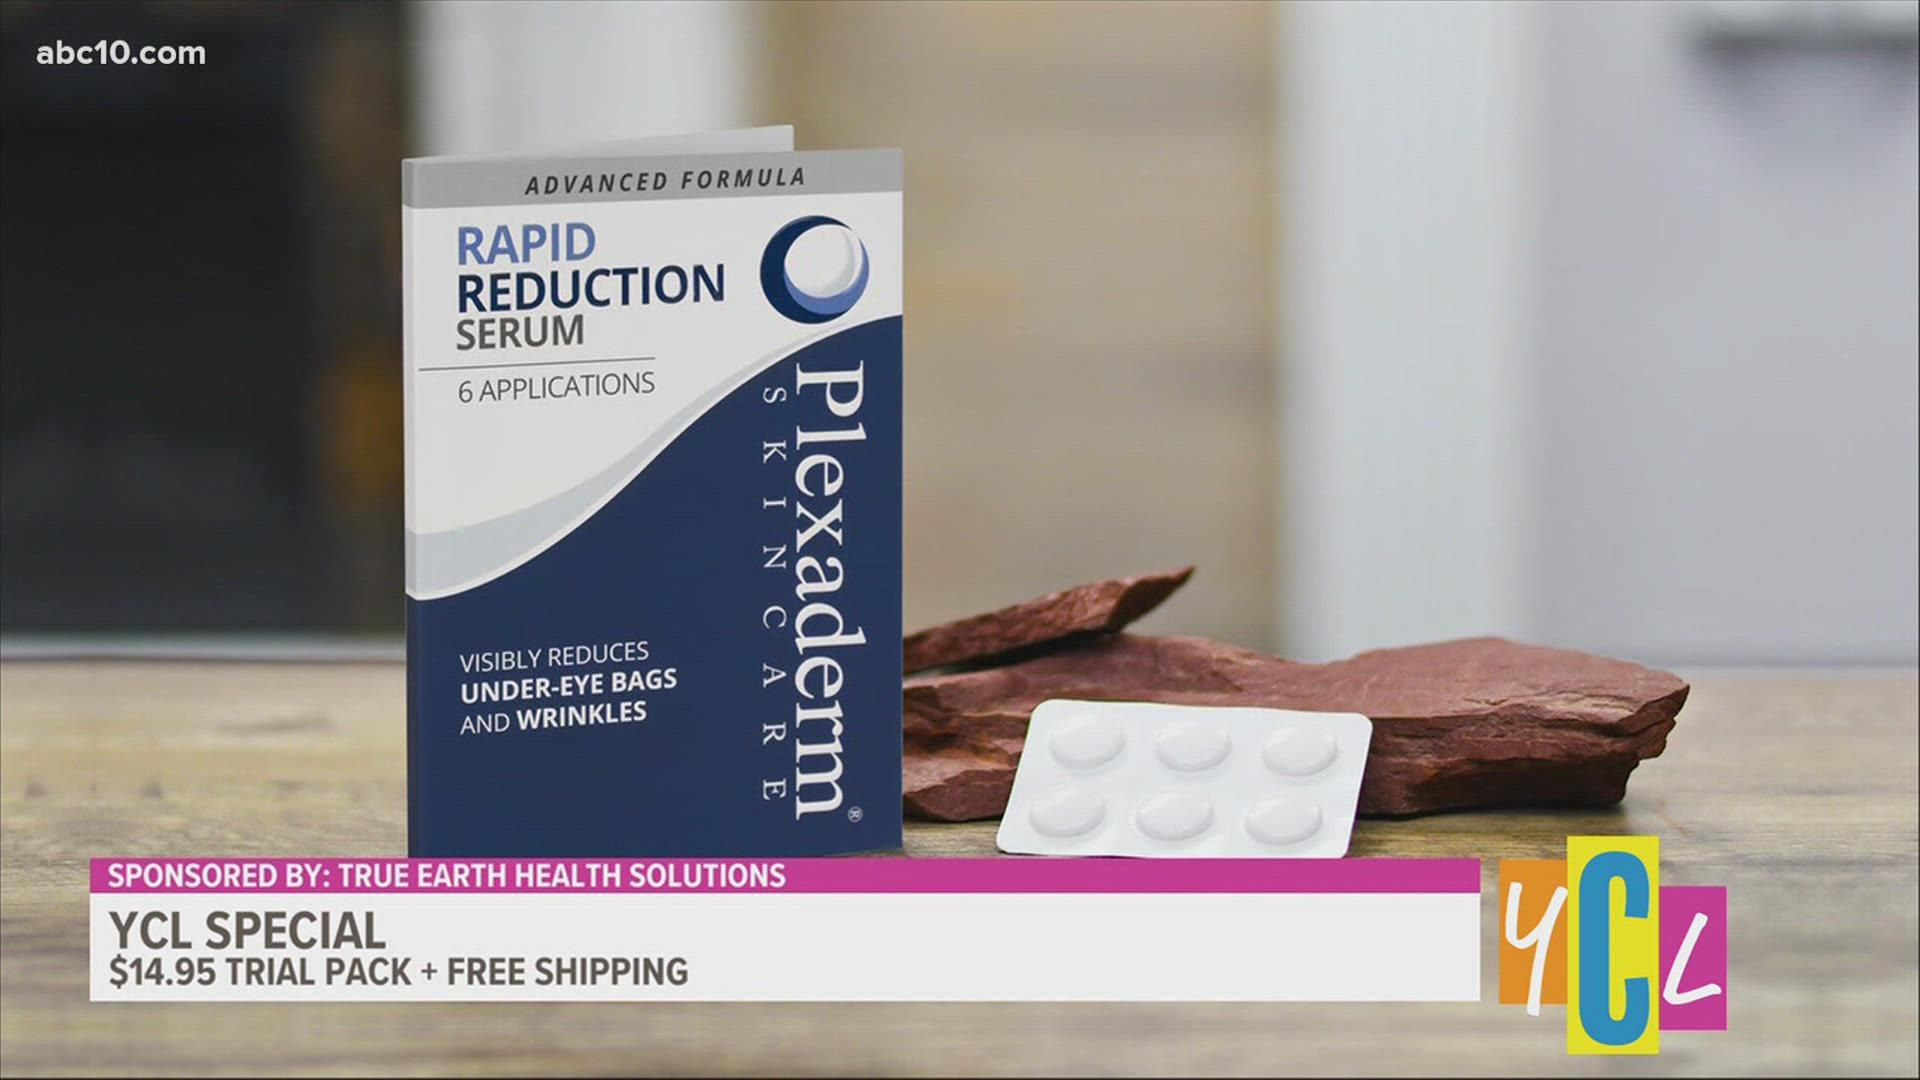 Plexaderm can make for a great gift for those trying to reduce undereye bags and wrinkles. This segment paid for by True Earth Health Solutions.